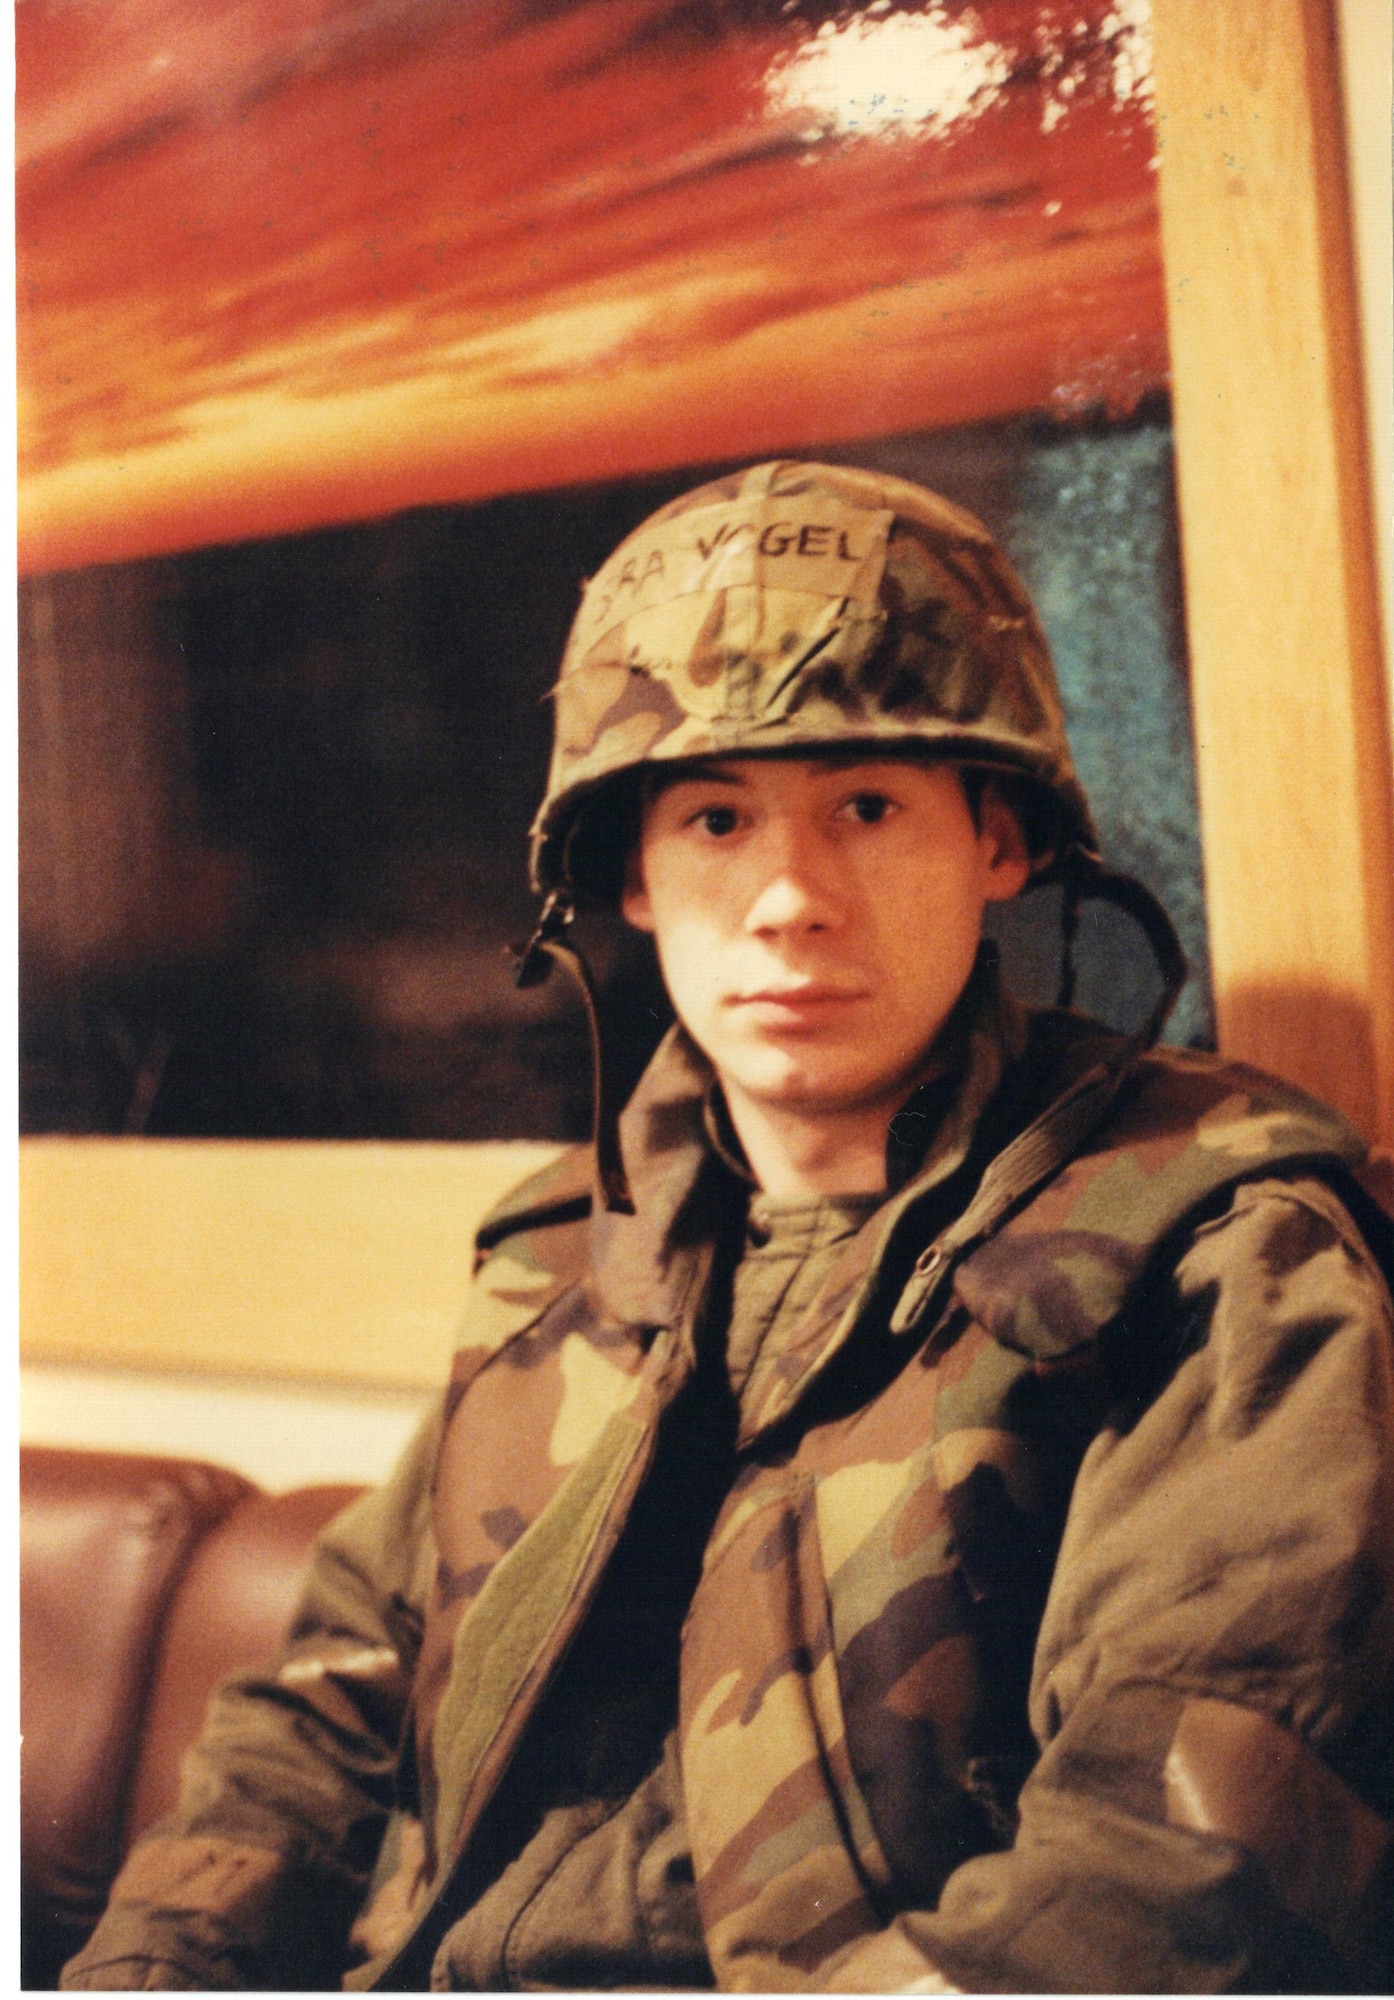 Chief Master Sgt. Richard Vogel, 51st Medical Group superintendent, is pictured as a senior airman during an operational readiness exercise at Osan Air Base, Republic of Korea, 1988. Vogel has held positions ranging from 51st Dental Squadron dental technician and the squadron’s superintendent, to the superintendent for the 51st MDG during his four tours in the ROK. (Courtesy Photo/Chief Master Sgt. Richard Vogel)